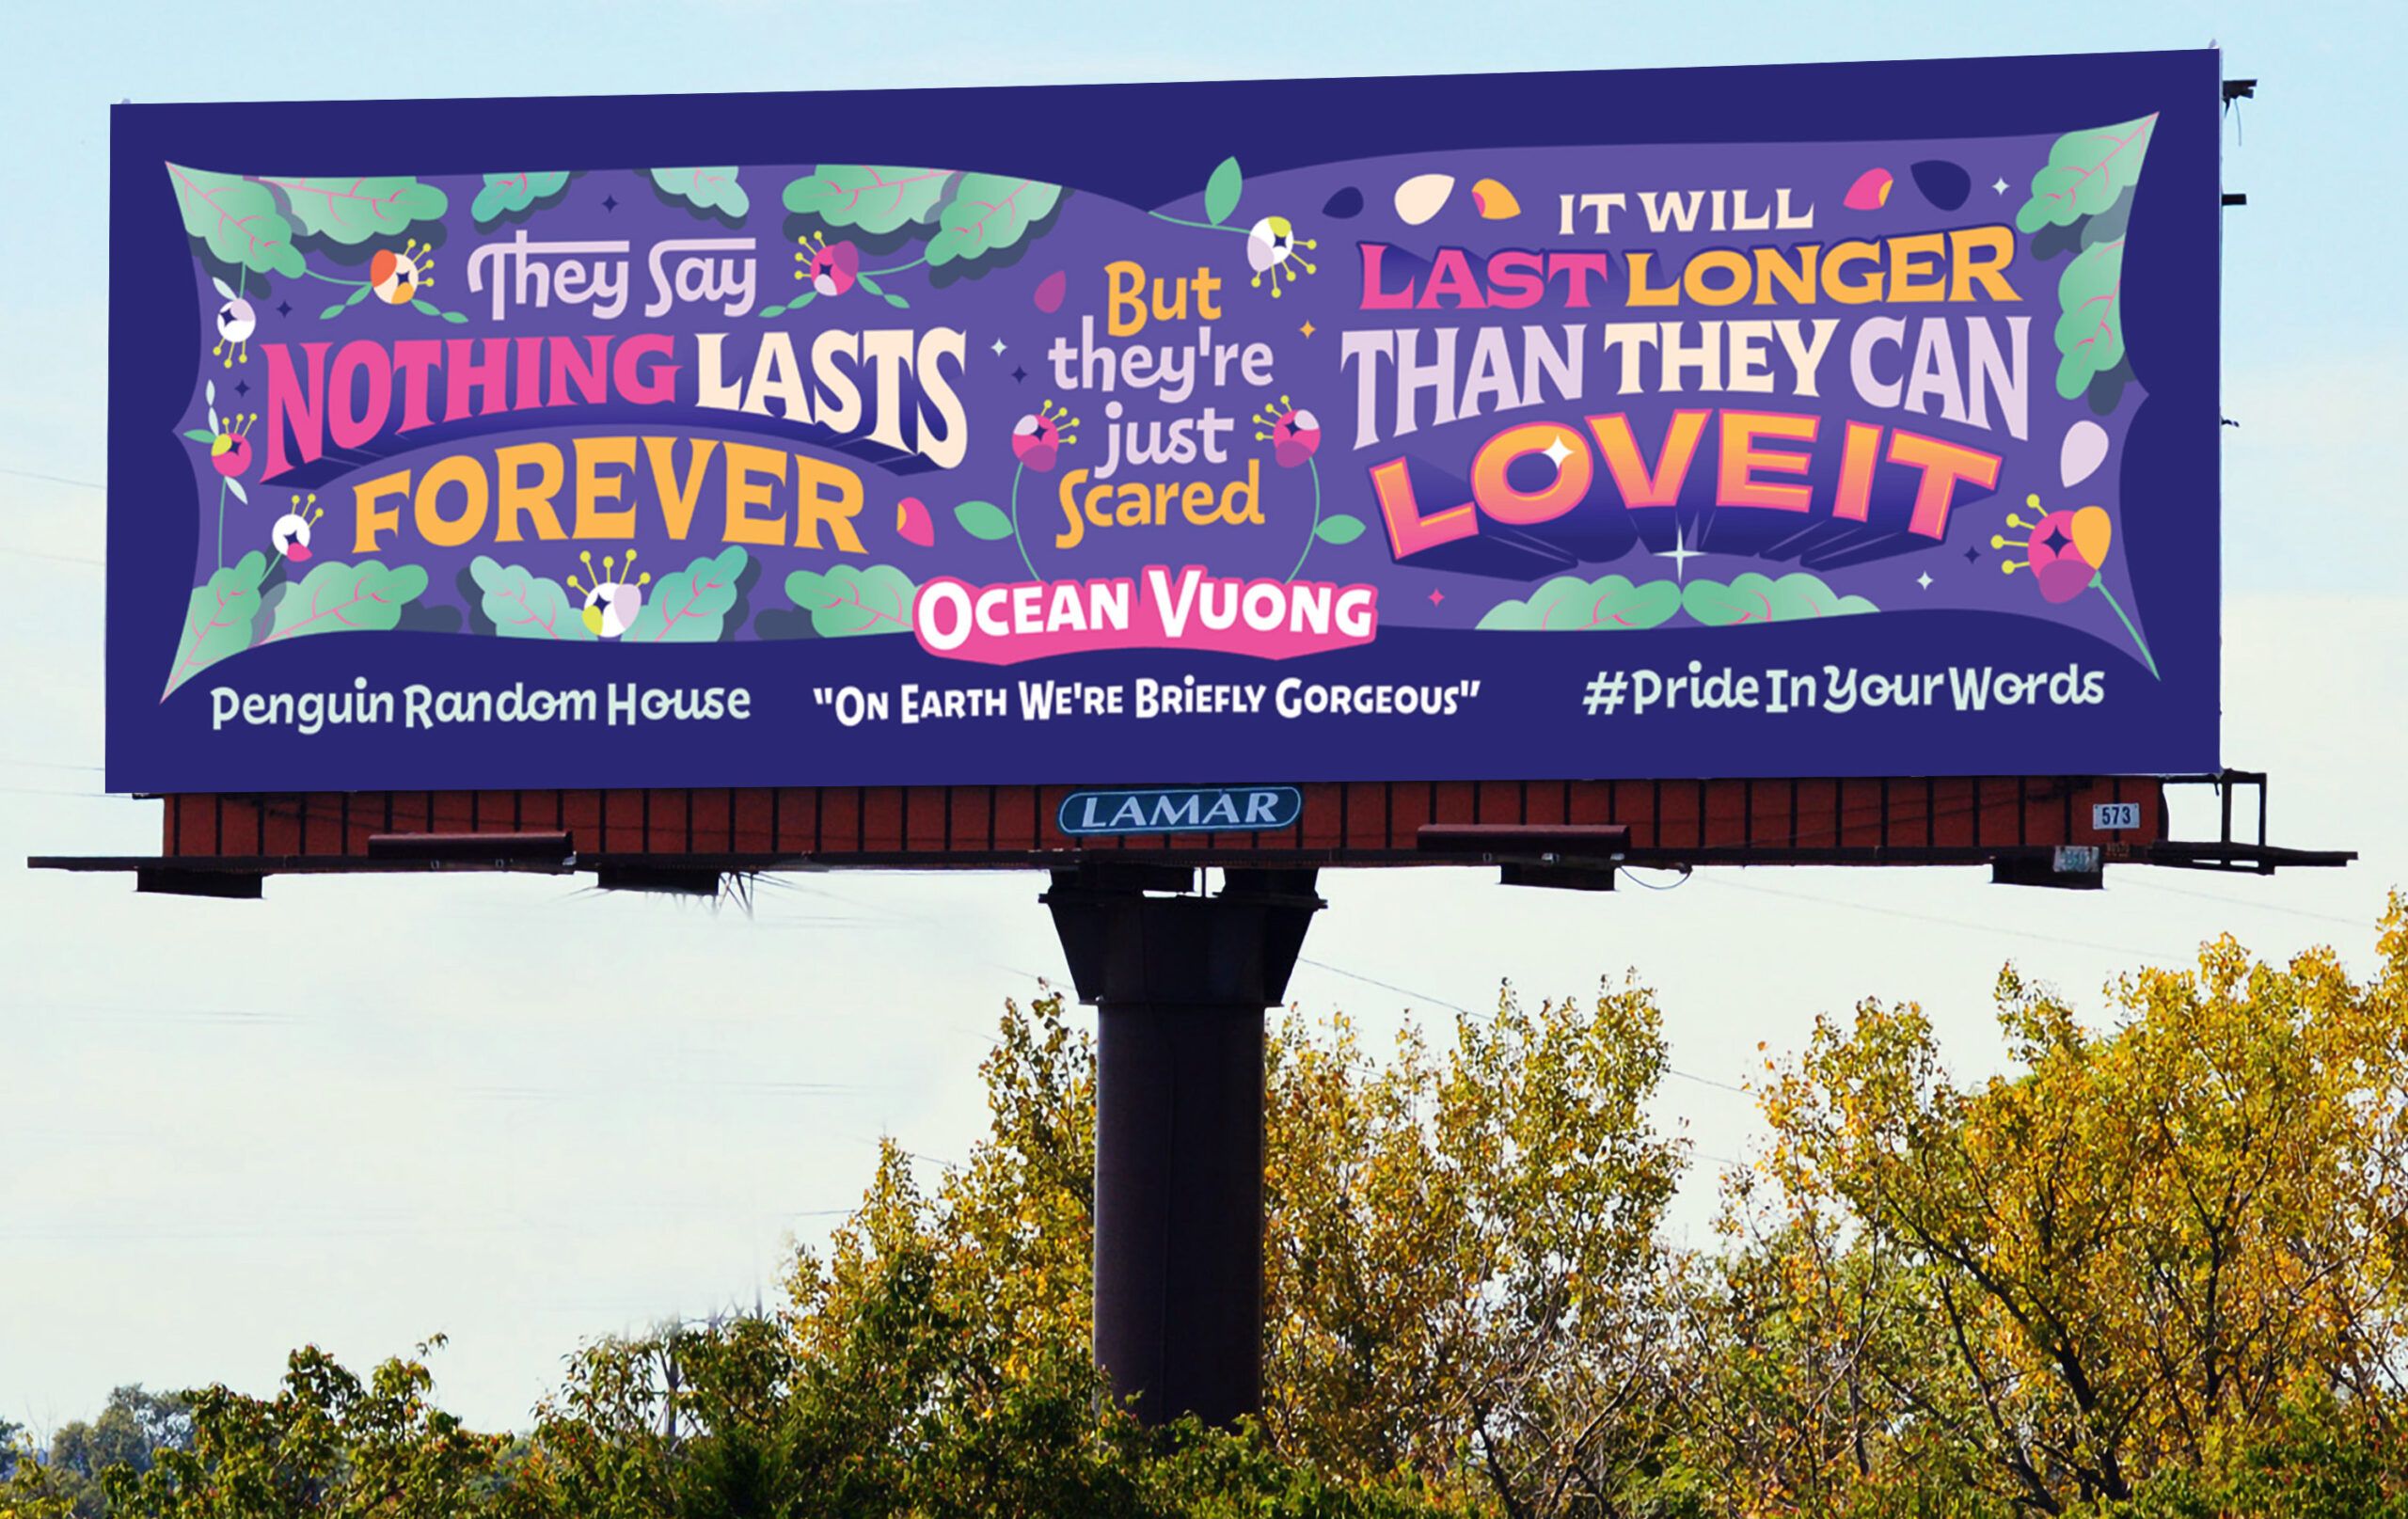 a photo of a billboard with artistic lettering reading "They say nothing lasts forever, but they're just scared it will last long than they can love it." - Ocean Vuong, On Earth We're Briefly Gorgeous